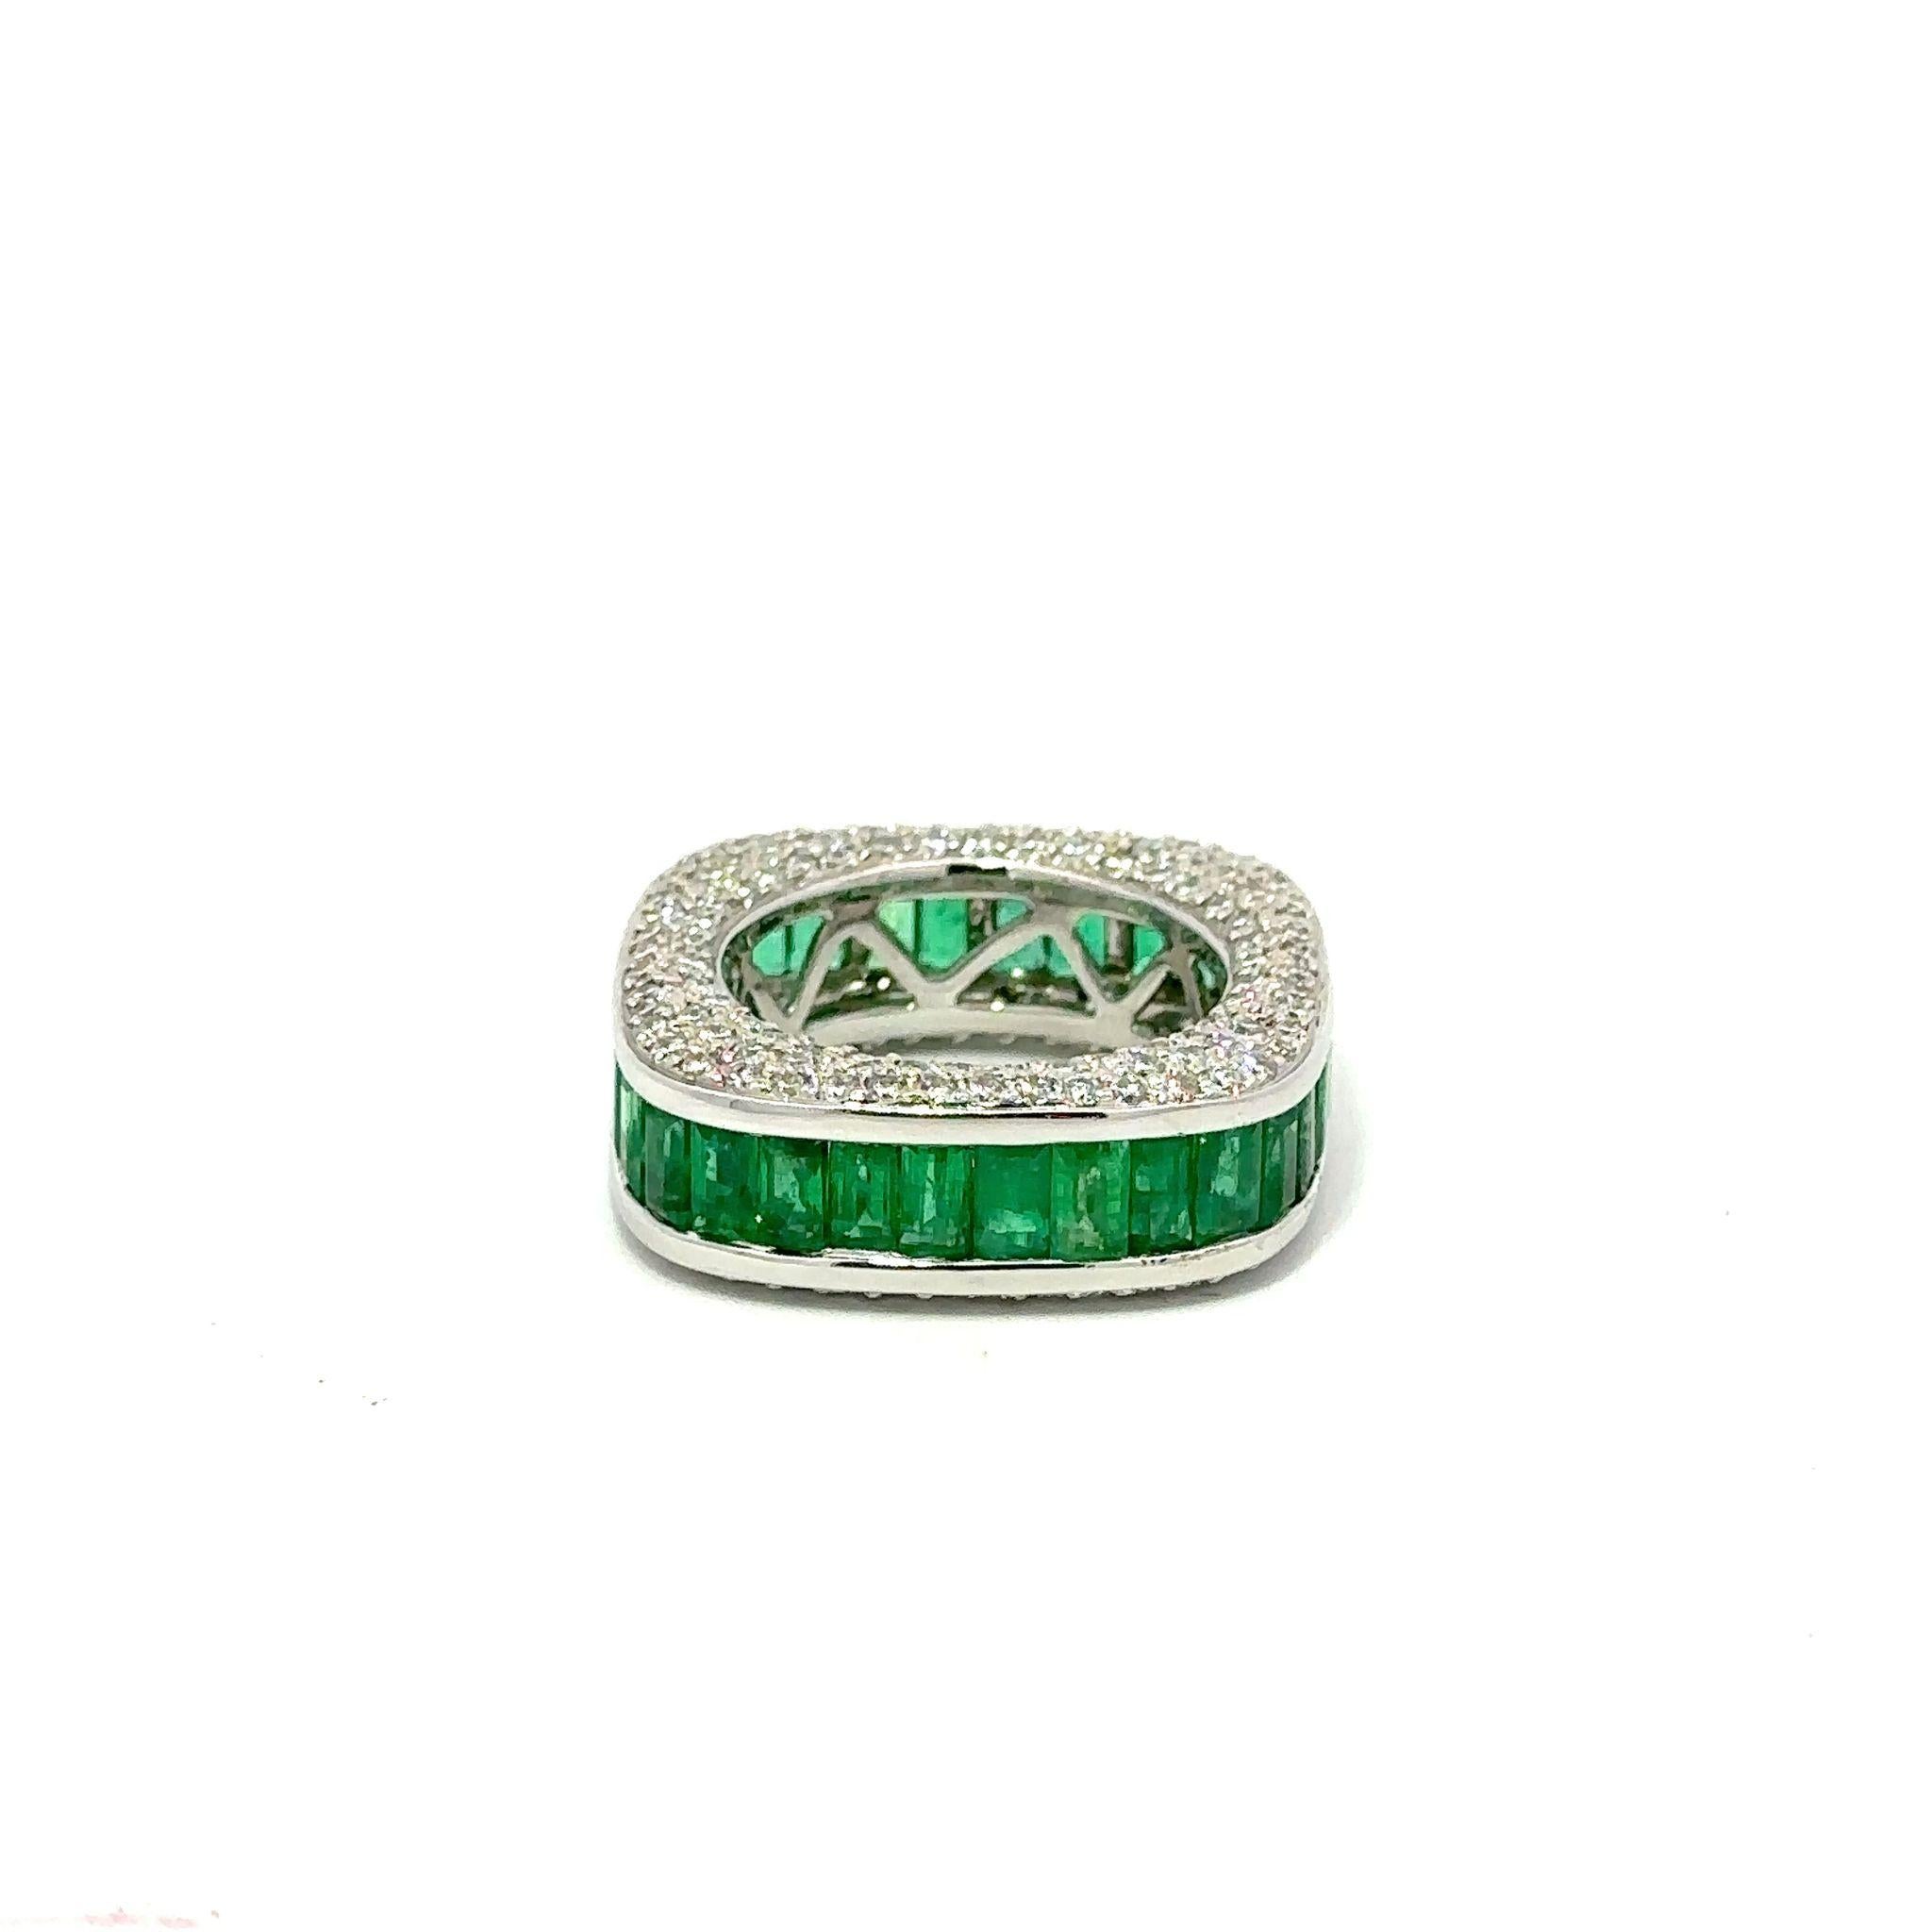 Modern cushion-shaped band with pavé diamonds and featuring channel-set emerald-cut emeralds.  Circa 2000.  The 212 round diamonds total 2.25 carats, G-H color and VS2-I1 clarity.  The 34 emeralds total 5.65 carats and have very nice saturation of